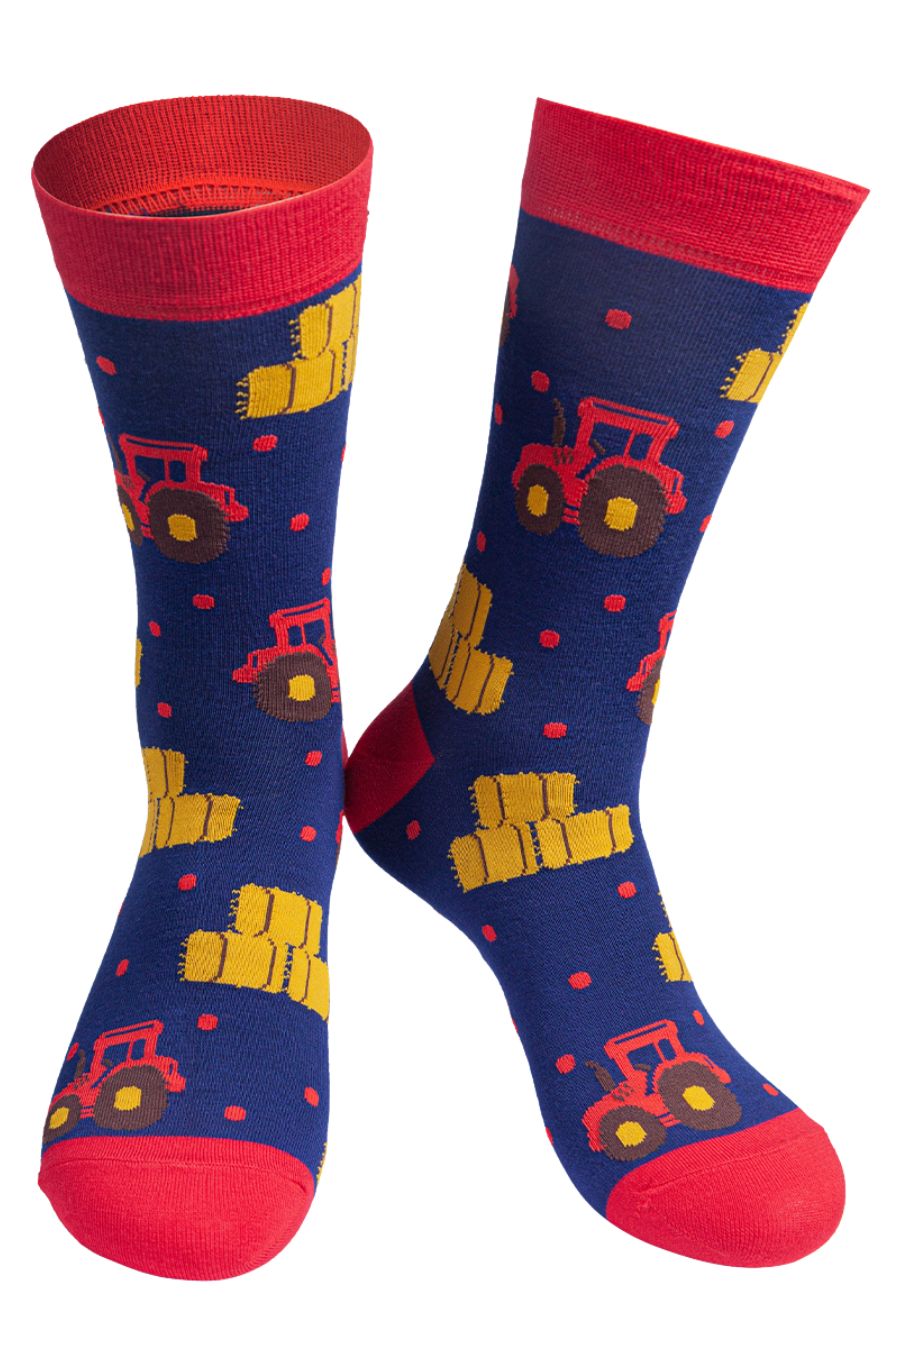 navy blue, red dress socks with red tractors and yellow hay bales